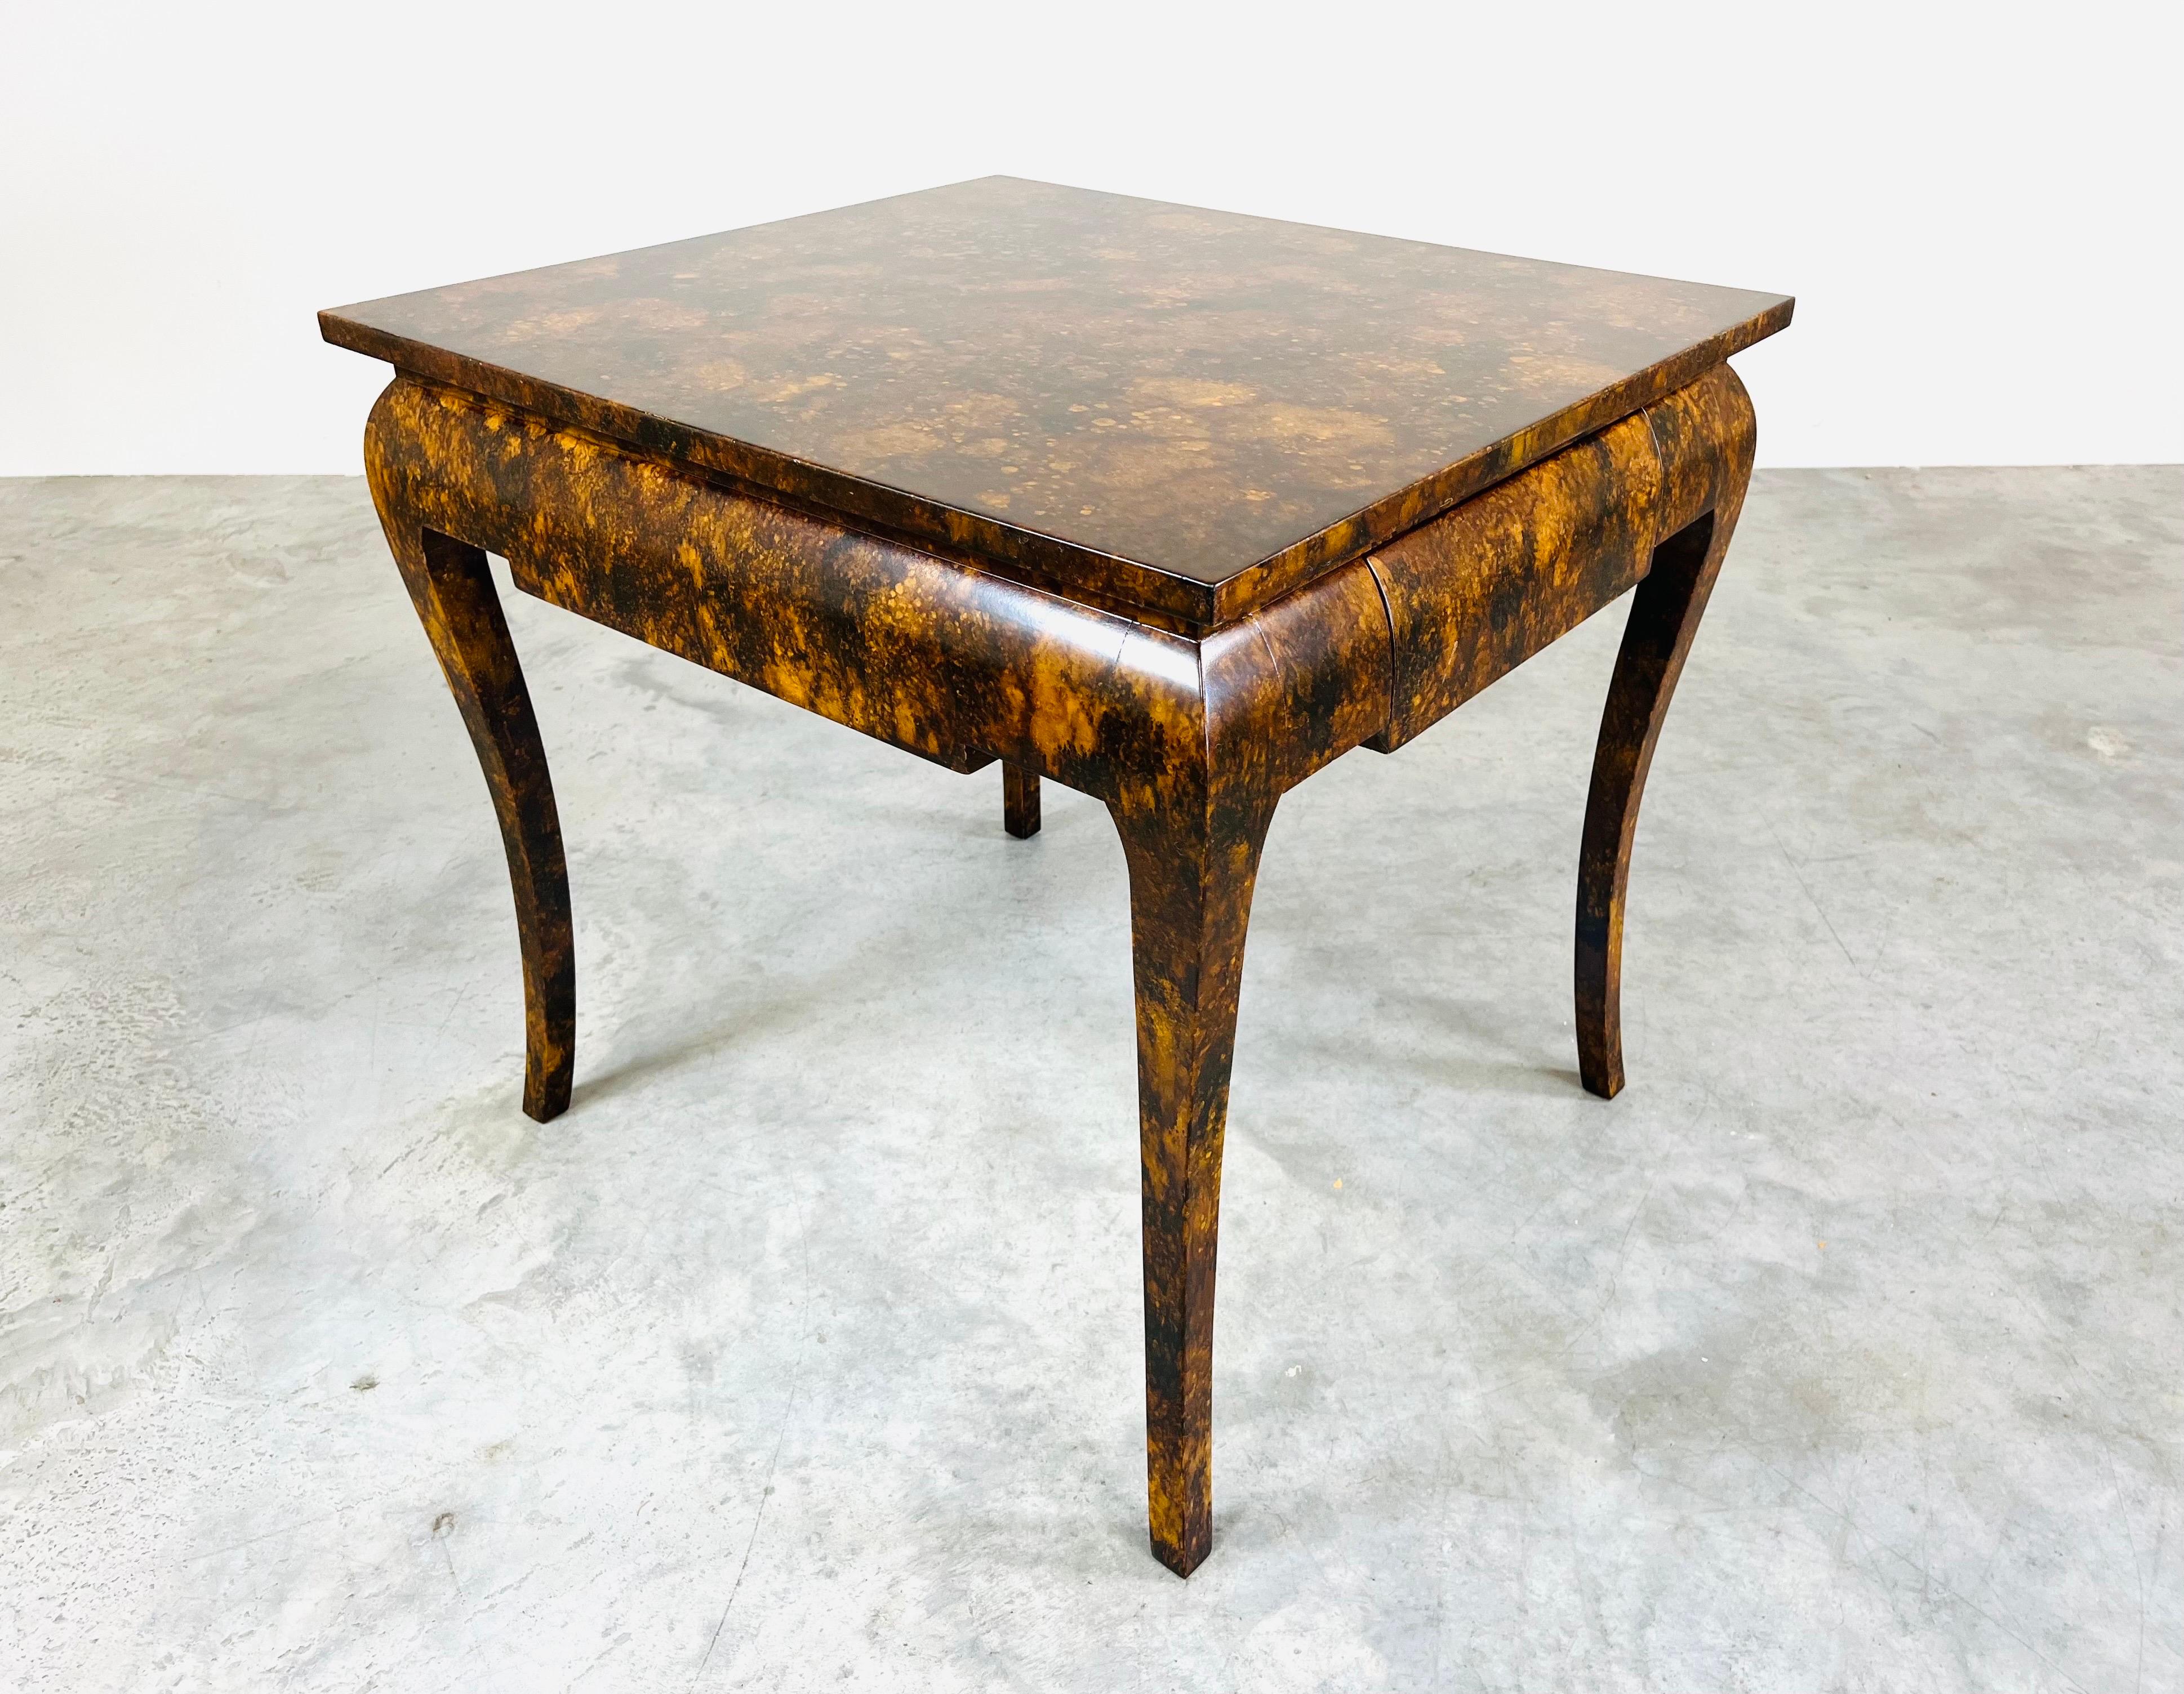 A vintage regency occasional table having faux tortoise finish having one slide out drawer for storage with sculptural legs and fantastic design. This is an eye-catching period piece that will ad character to the space in which it is added. 
